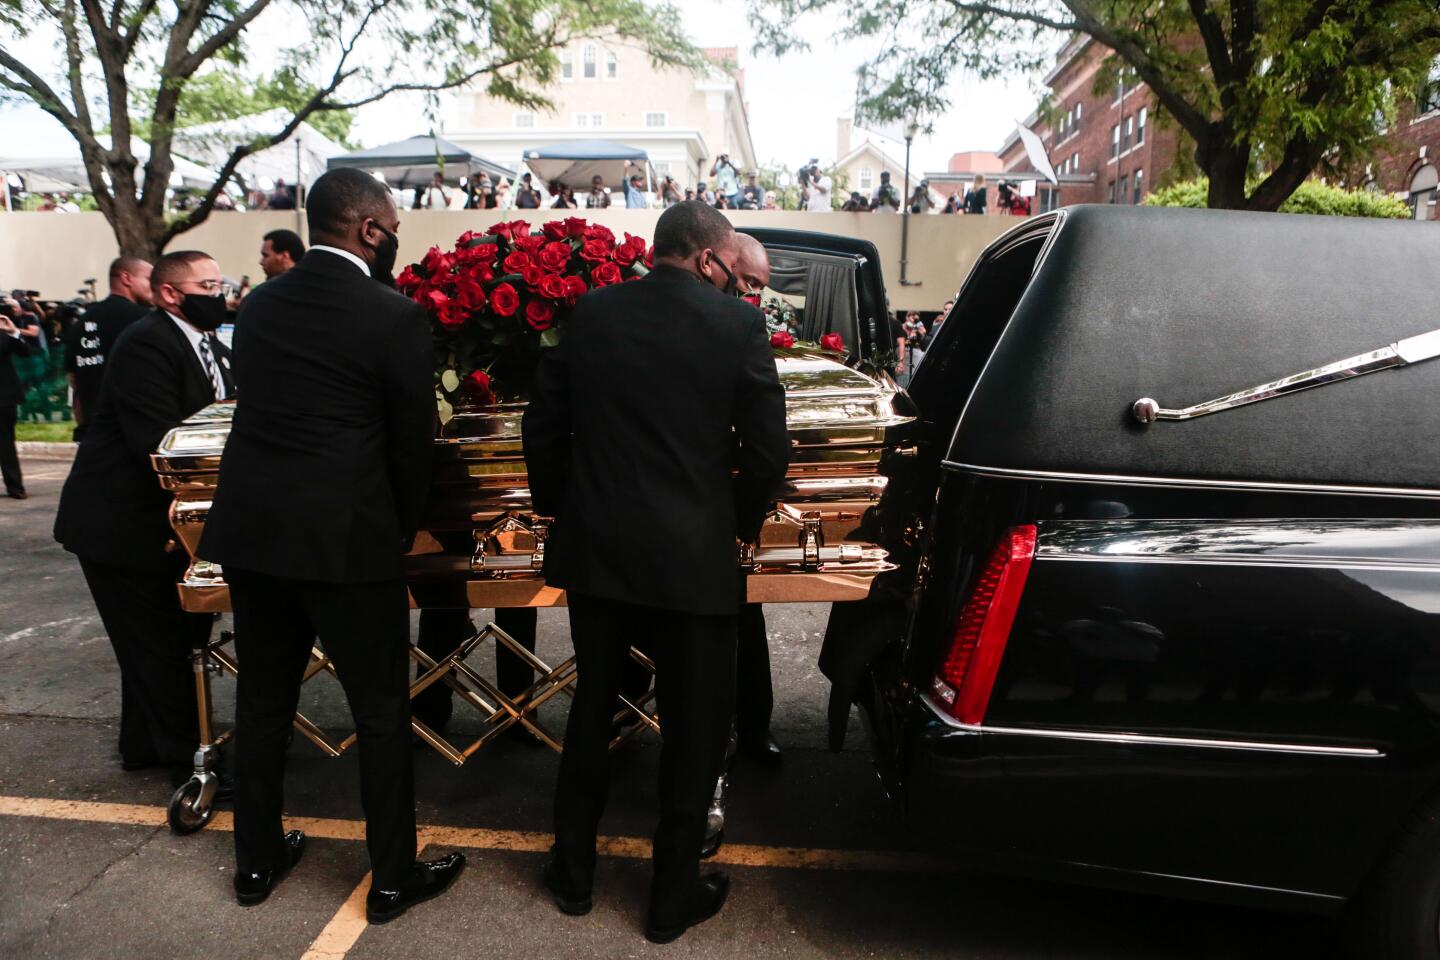 MINNEAPOLIS , MINNESOTA - JUNE 04: Hundreds of people cheer and chant as George Floyd's casket is placed into the hearse after his memorial service on Thursday, June 4, 2020 in Minneapolis , Minnesota. (Jason Armond / Los Angeles Times)